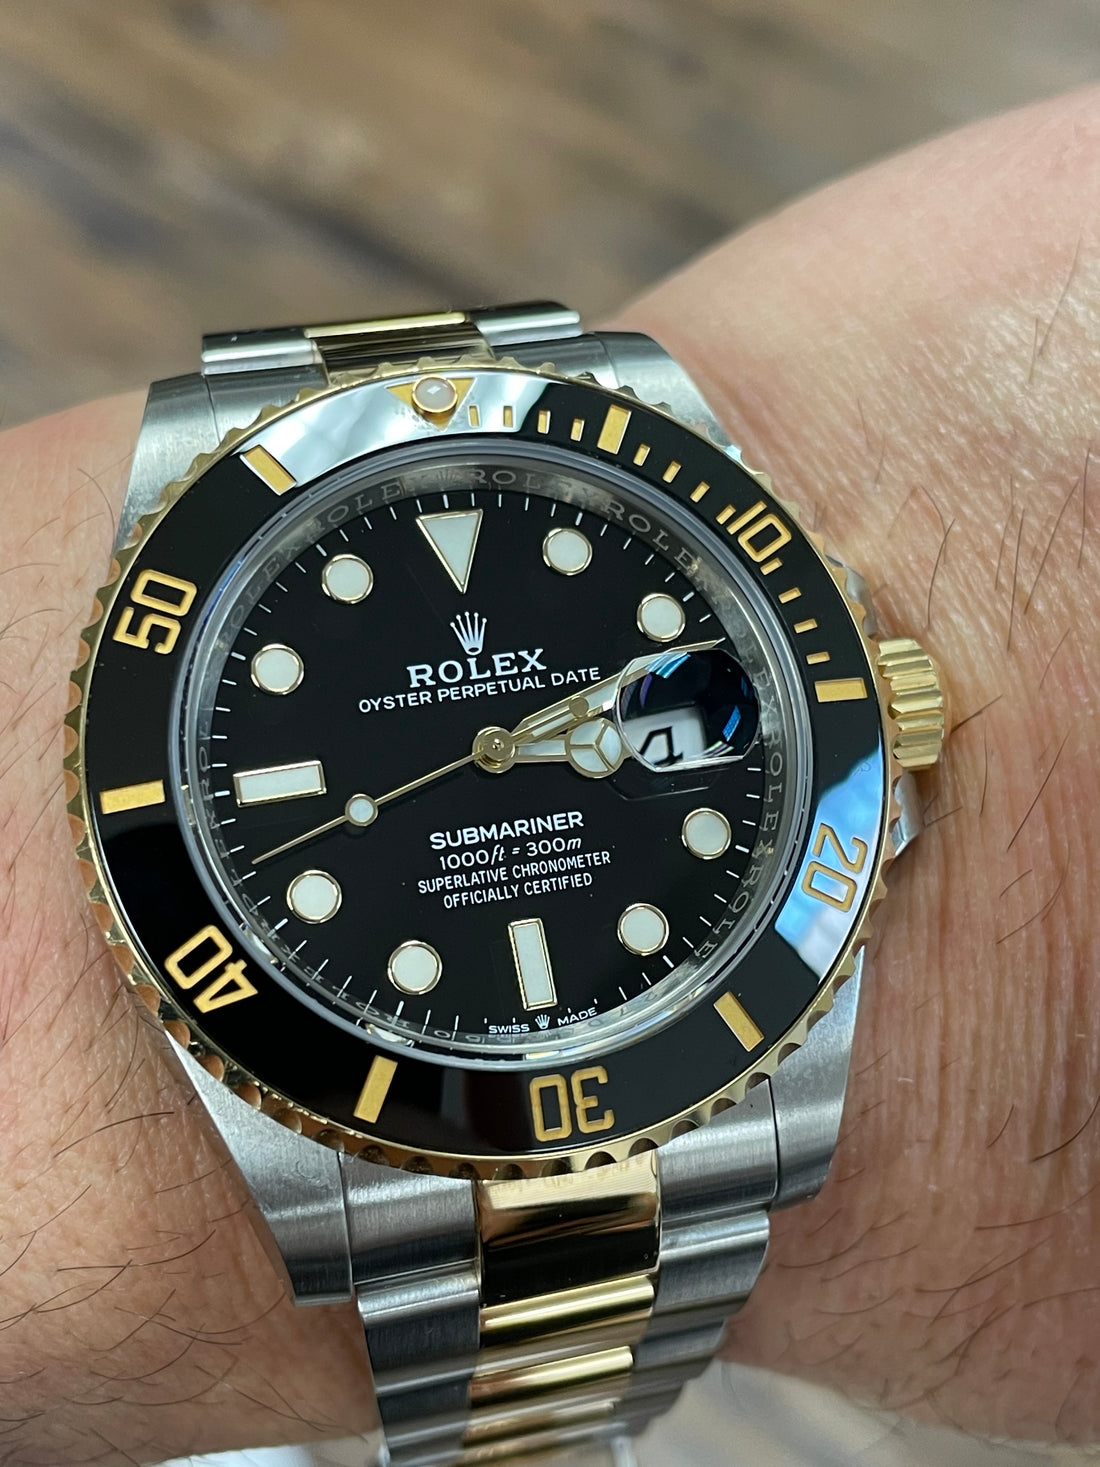 Rolex and The Crown